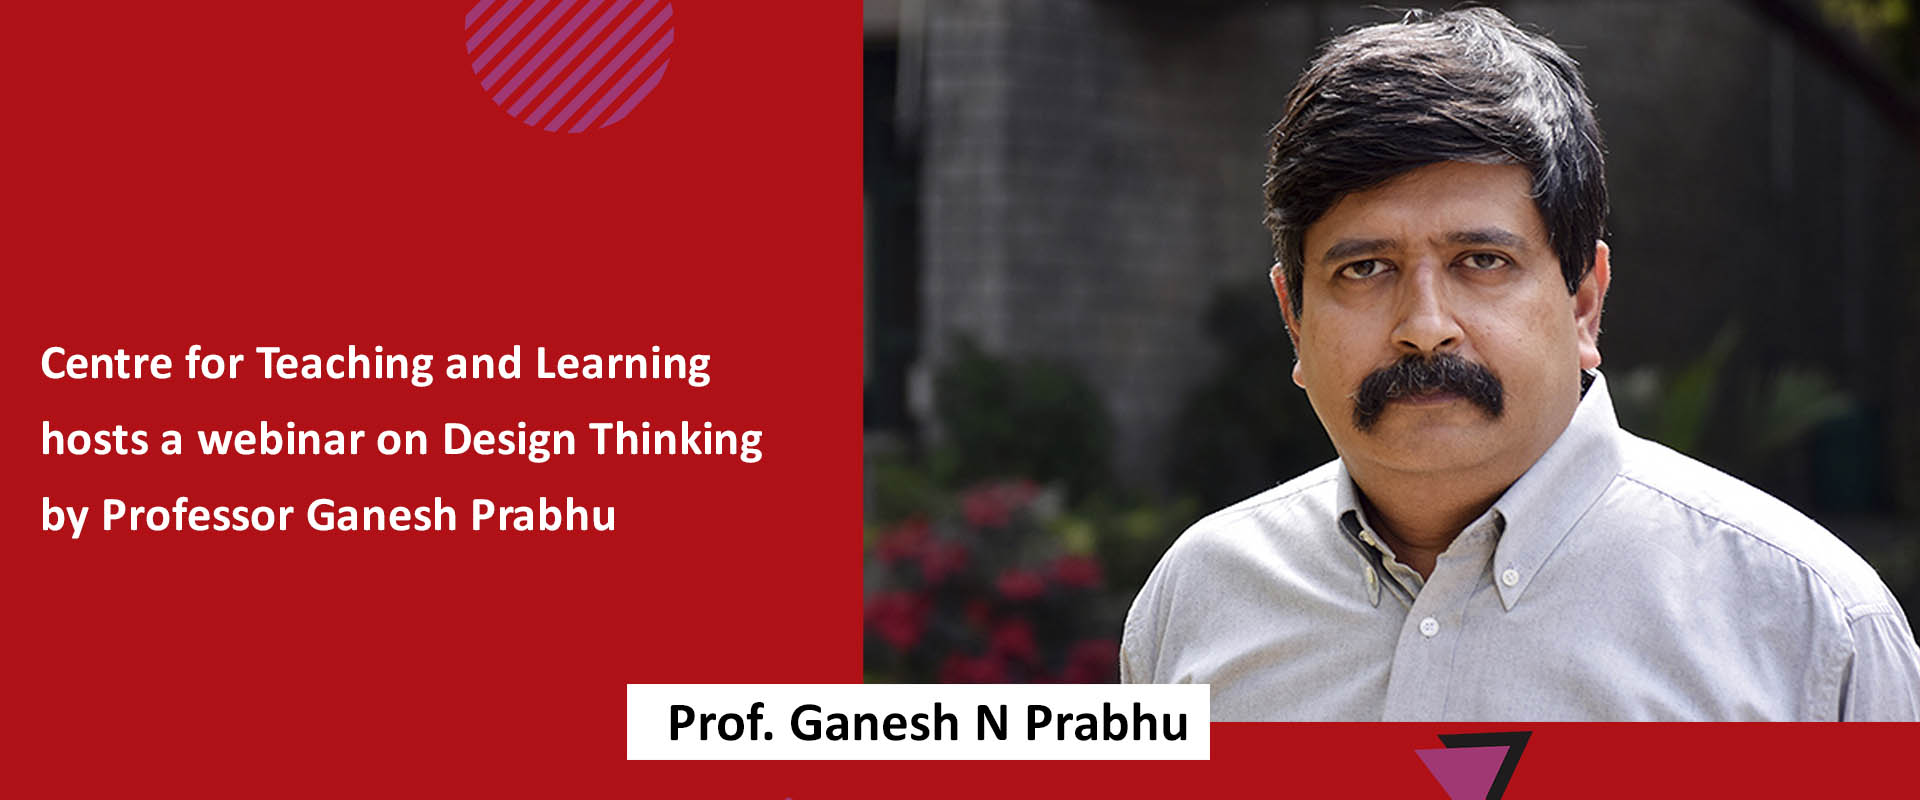 Centre for Teaching and Learning hosts a webinar on Design Thinking by Professor Ganesh Prabhu